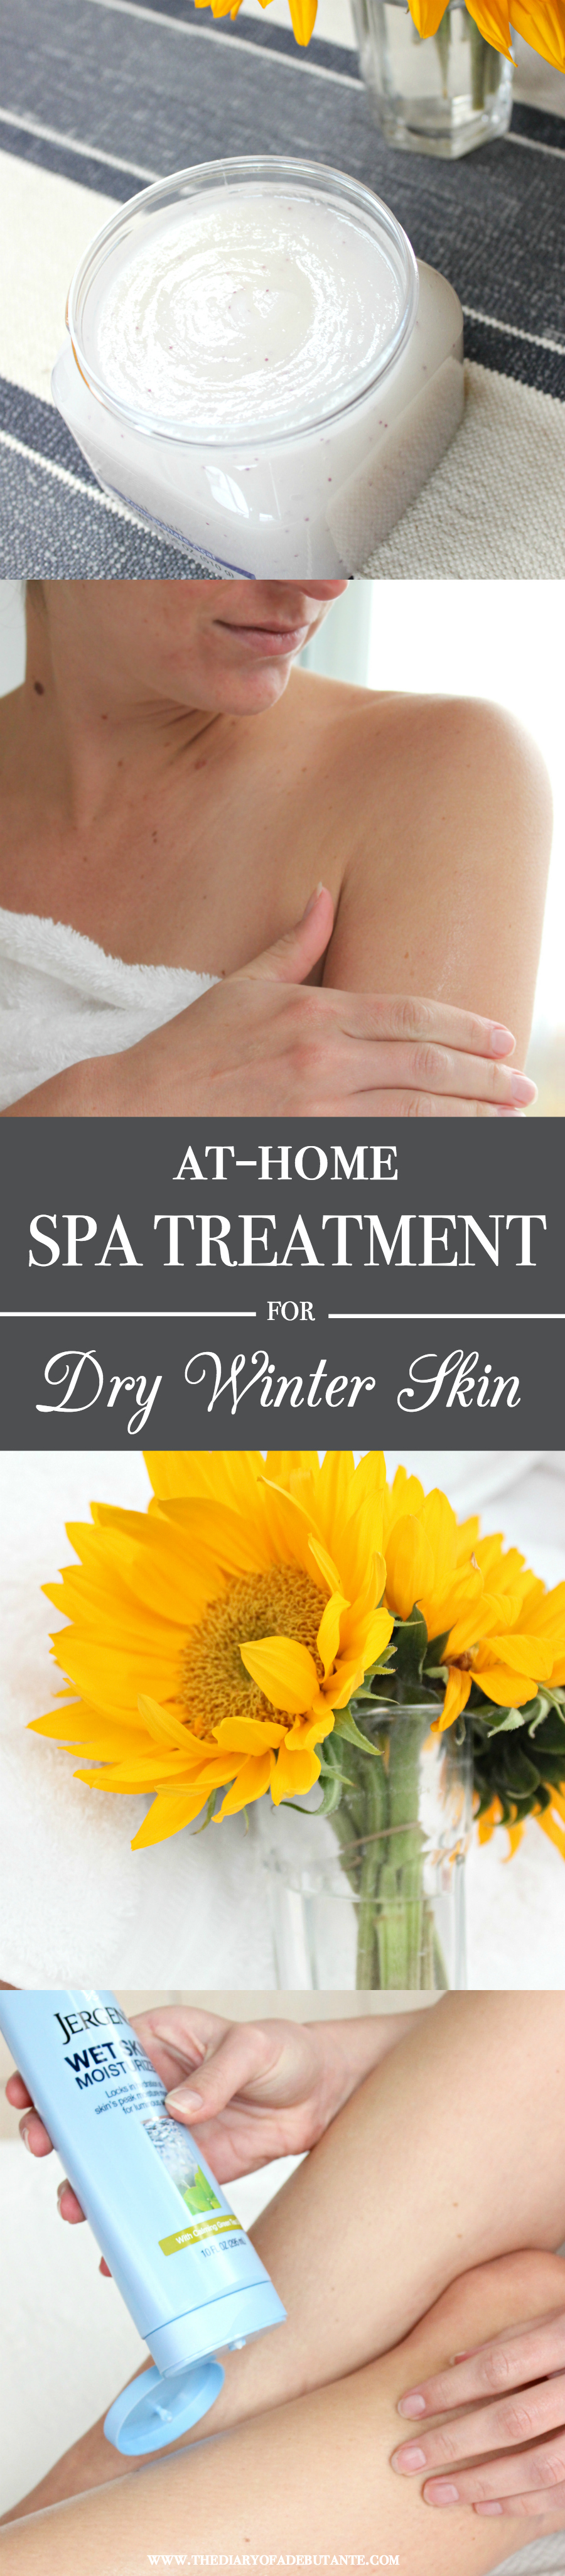 How to give dry winter skin an at-home spa treatment with Jergens